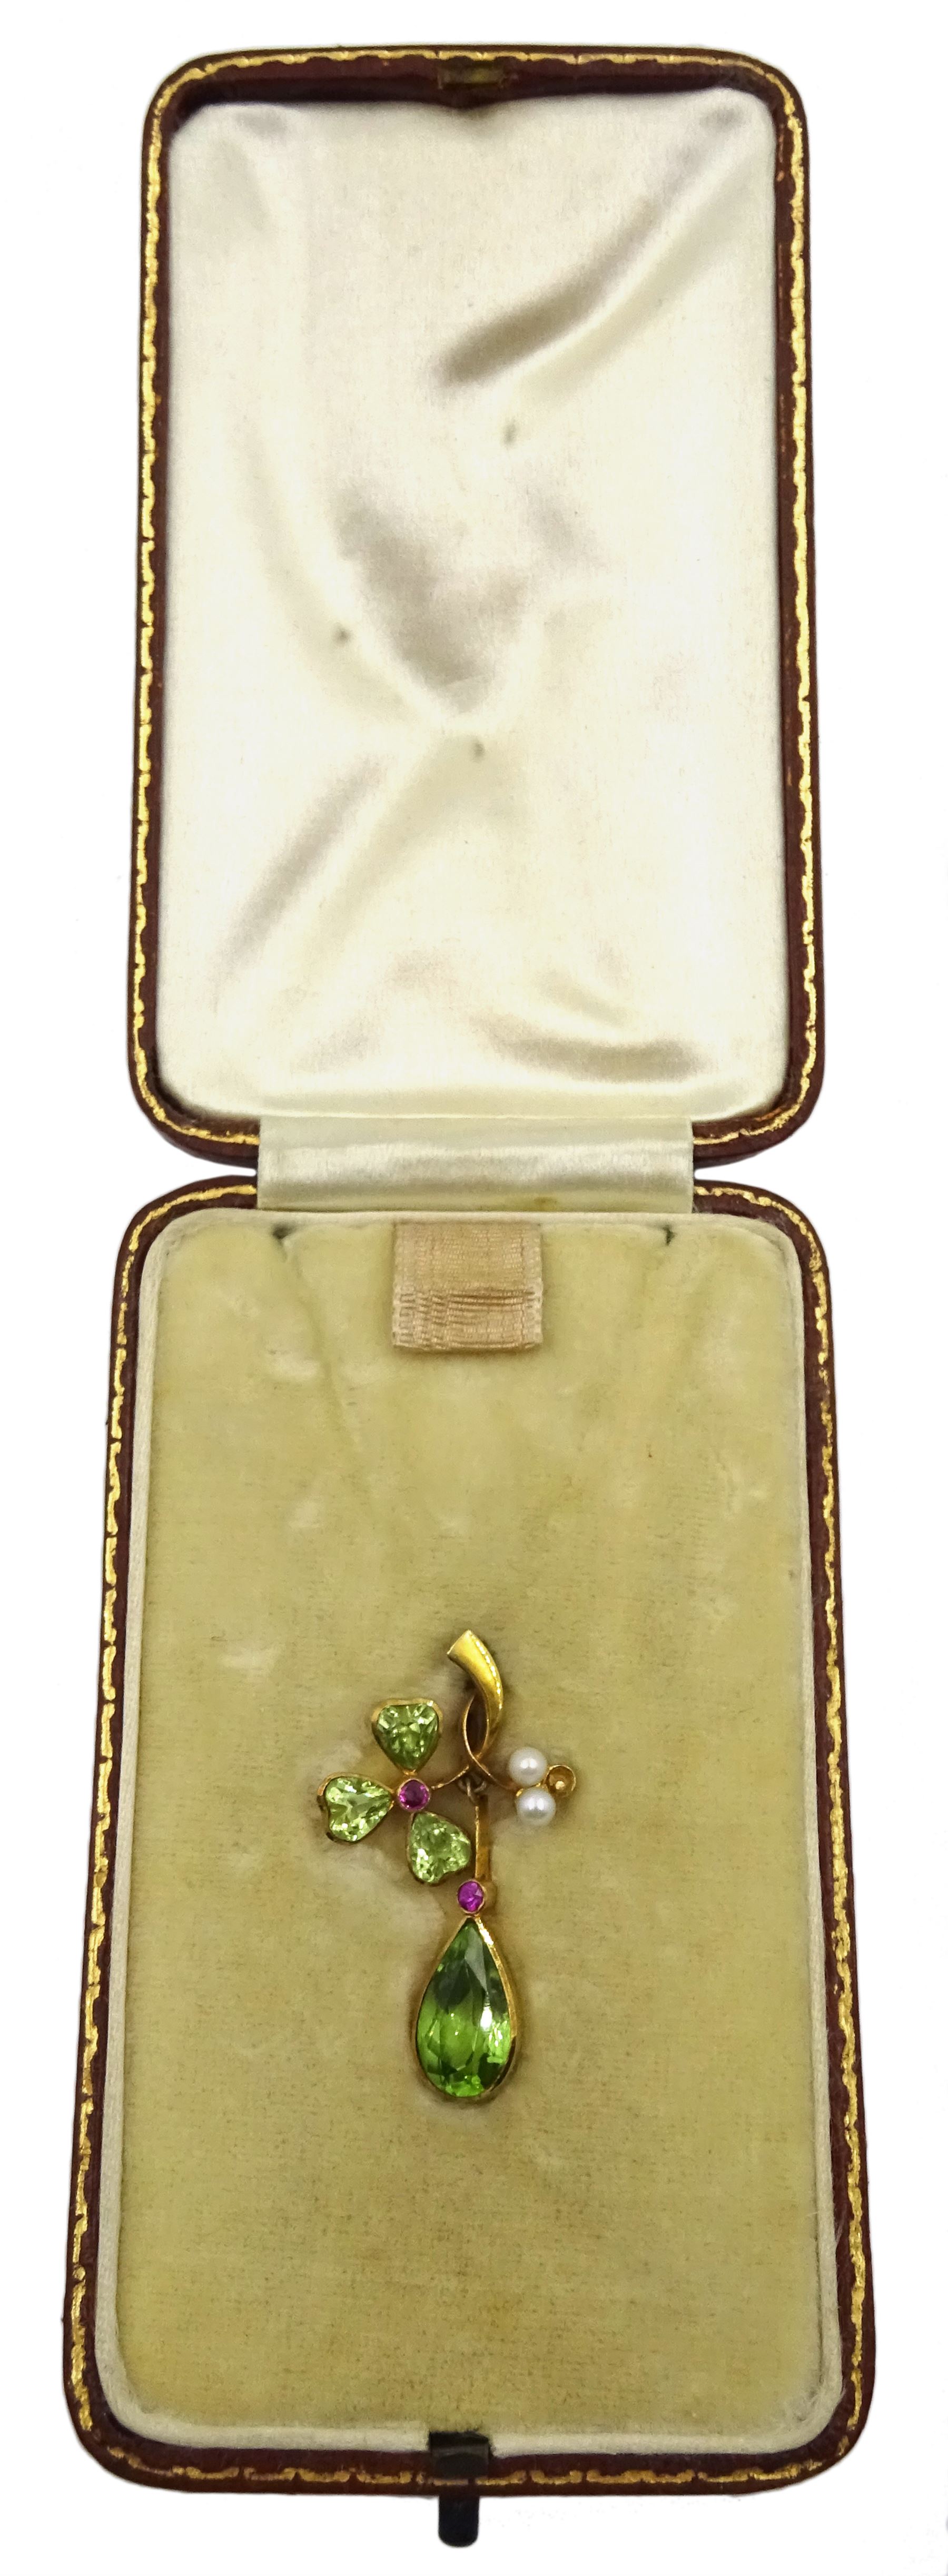 Early 20th century 15ct gold peridot - Image 2 of 3